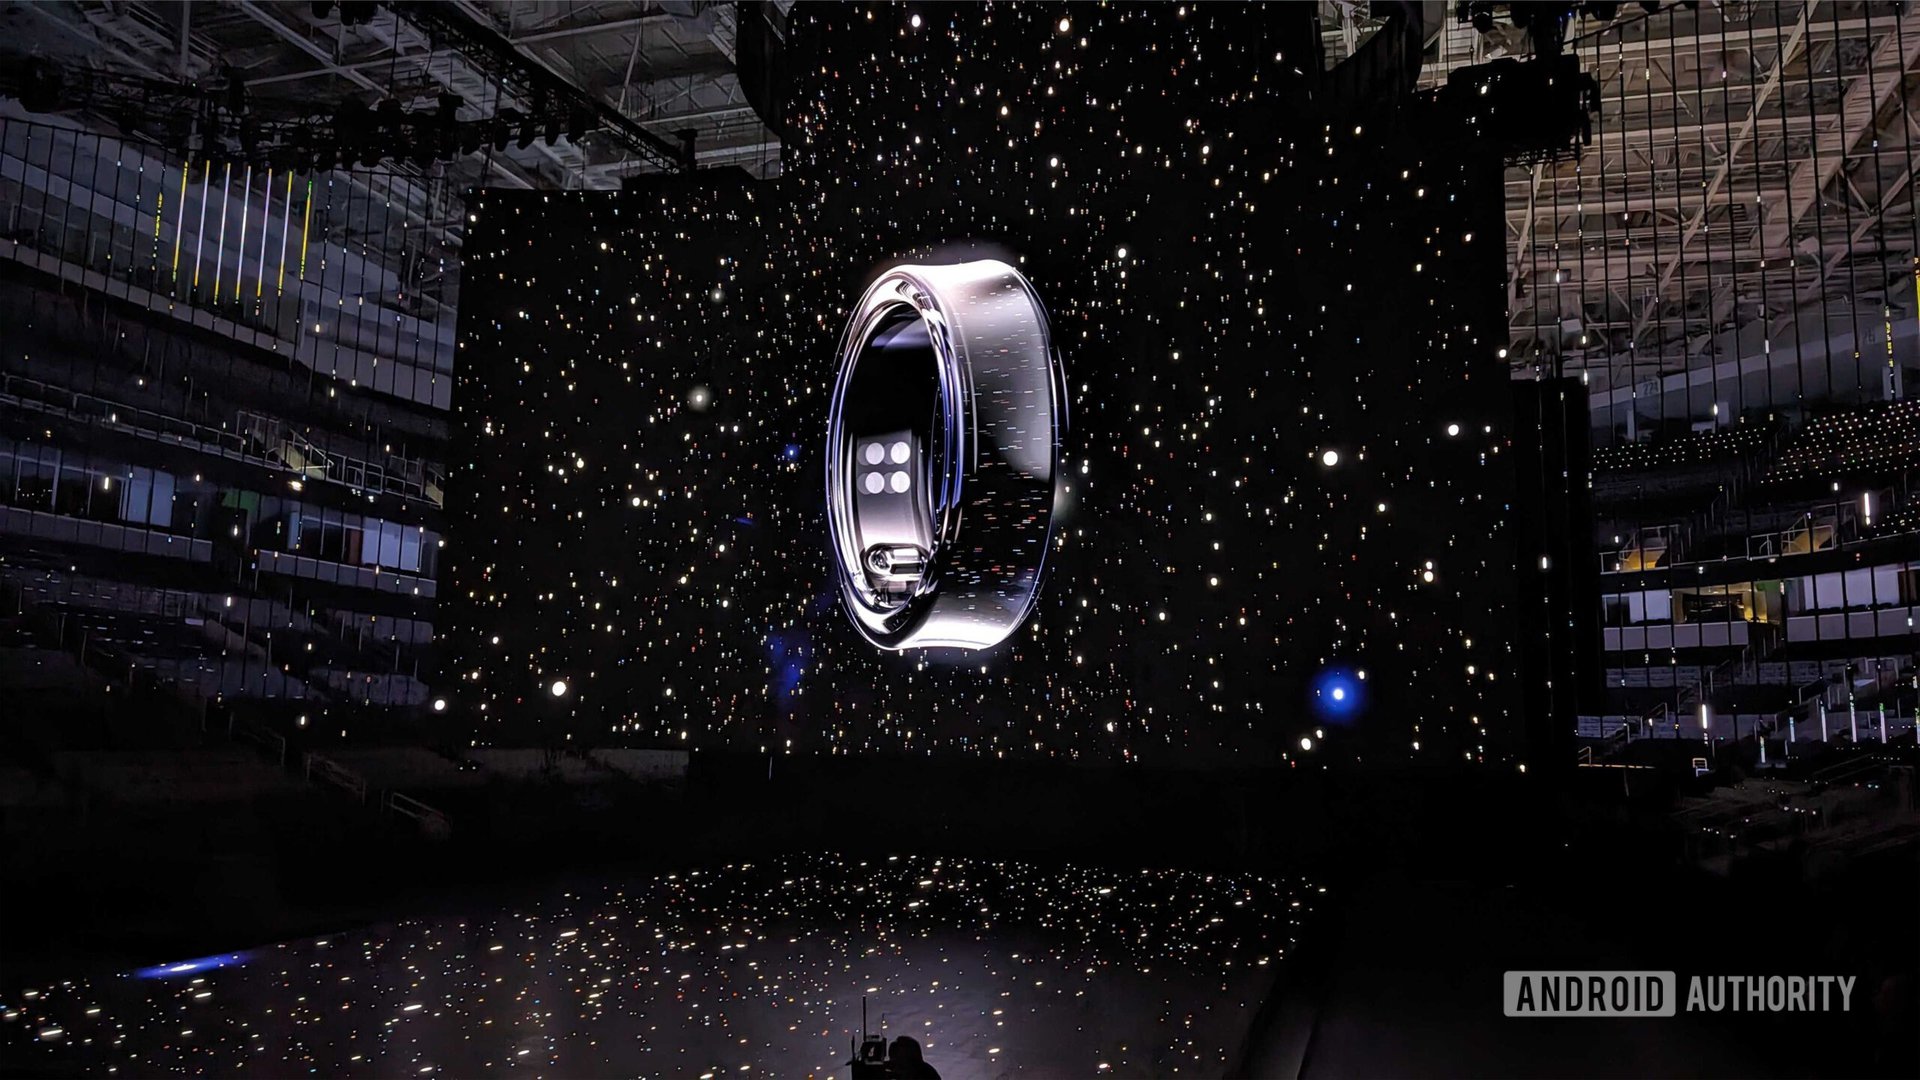 I have high expectations for the Samsung Galaxy Ring